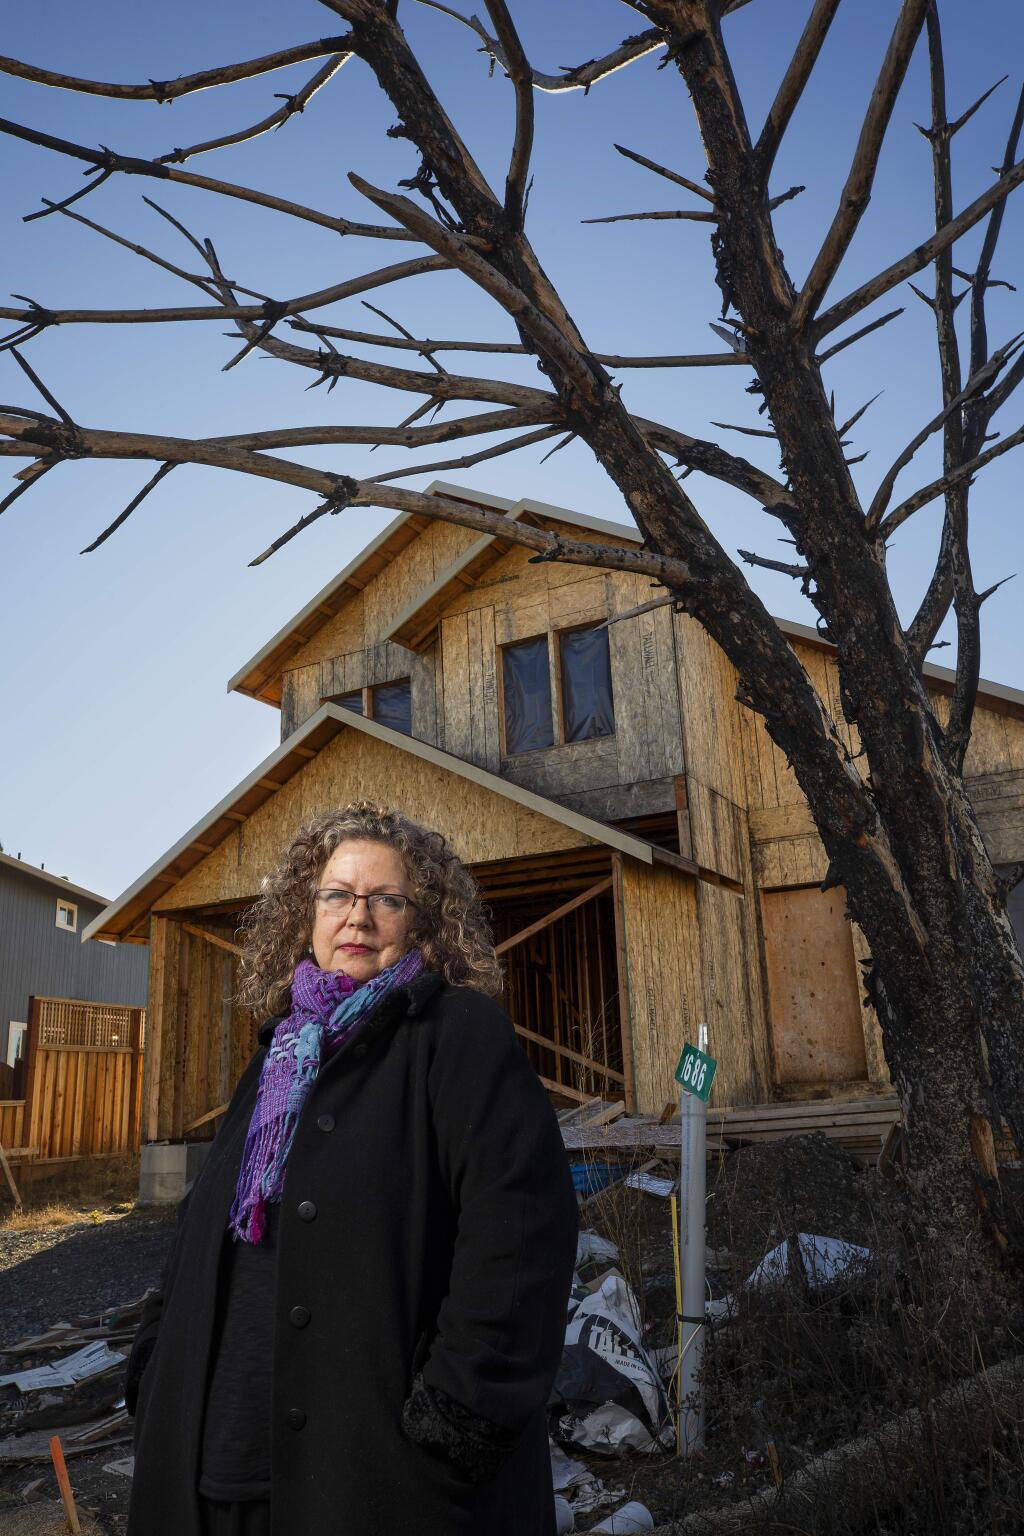 Marybeth Adkins refused to pay Urban Equity Builders' $73,000 invoice. The company stopped work on her Coffey Park home in Santa Rosa in mid-July and later the city revoked the building permit from the contractor. (photo by John Burgess/The Press Democrat)